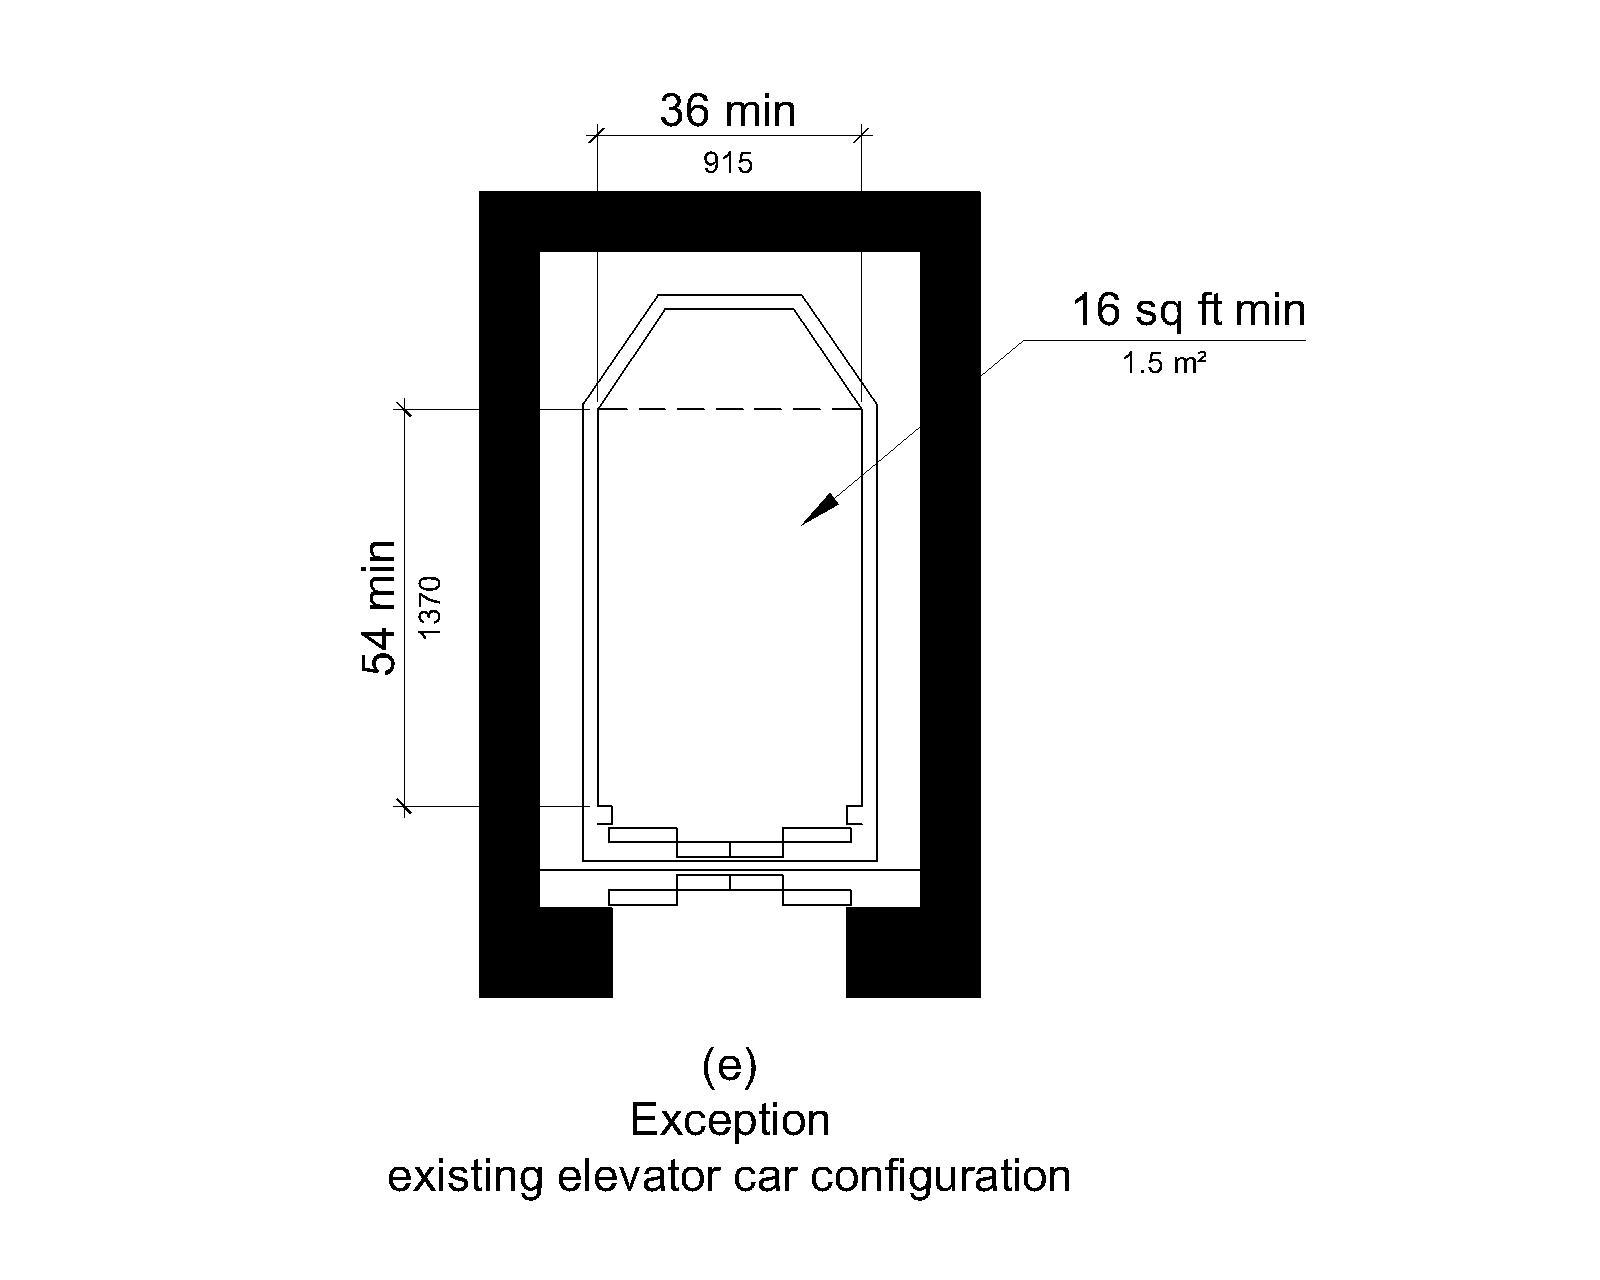 Figure (e) illustrates the exception for an existing elevator car configuration. The car depth is 54 inches (1370 mm) minimum, the width is 39 inches (915 mm) minimum, and the clear deck surface area is 16 square feet (1.5 square m) minimum.